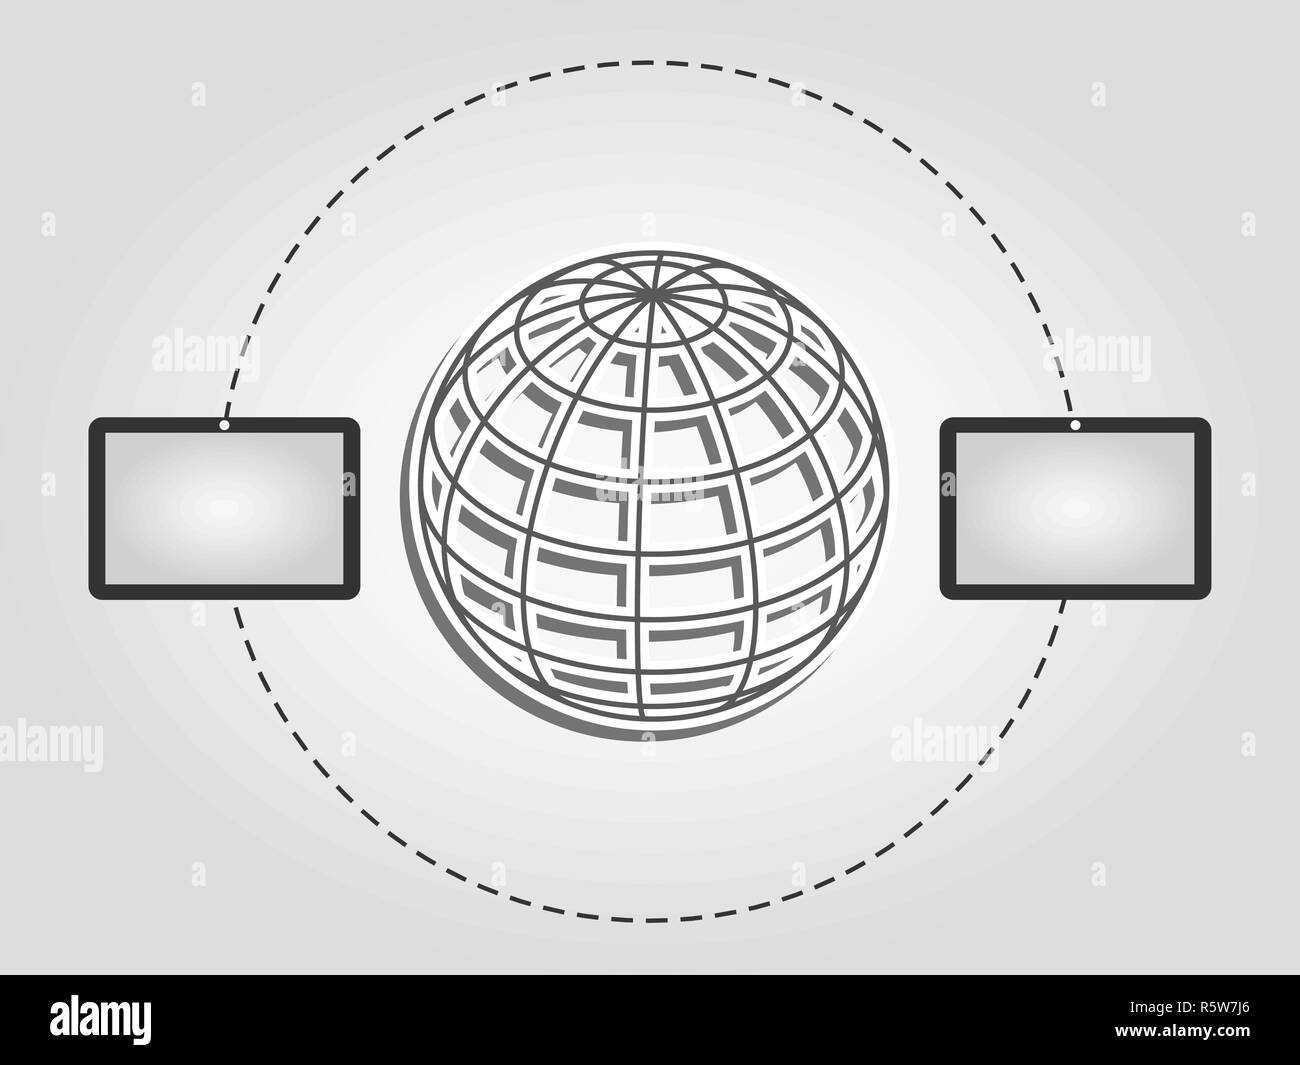 Two tablets communicate wireless around a globe on a gray background. Global connection, wireless communication, transfer data, concept Stock Vector